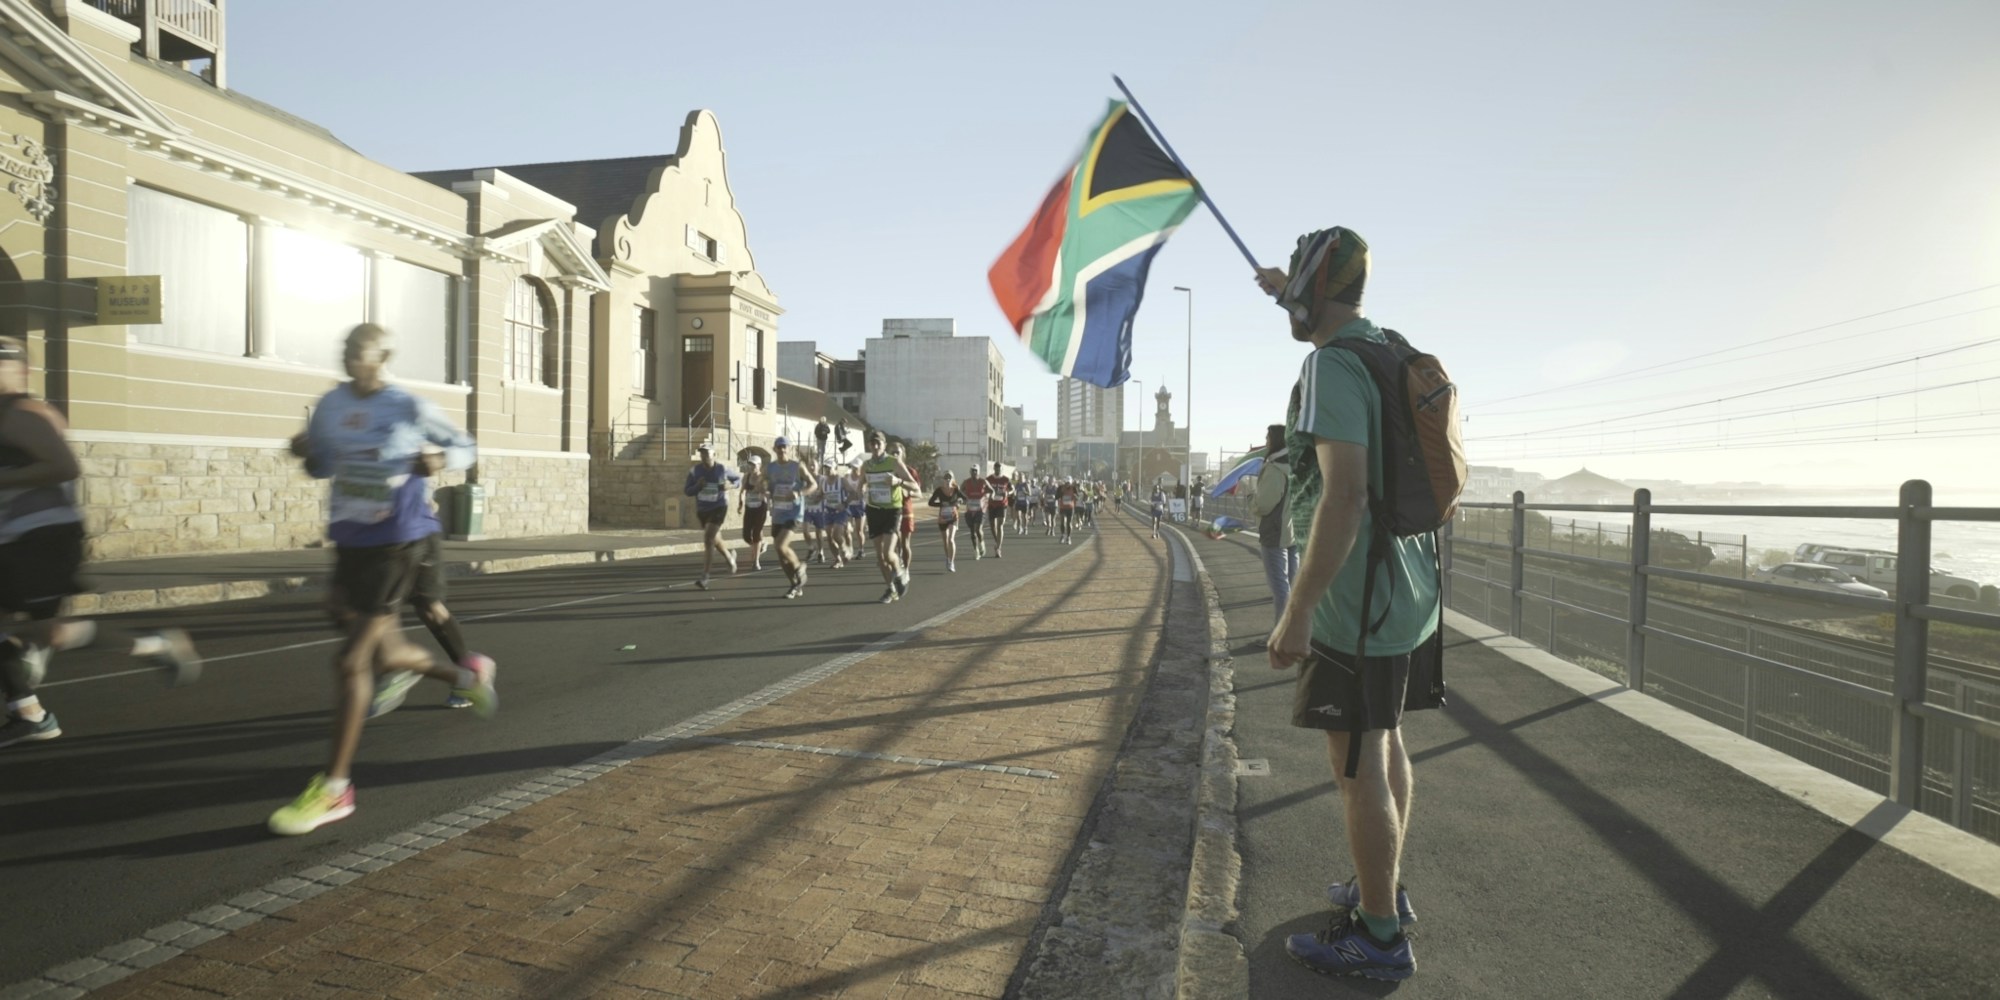 Two Oceans Marathon runners and supporters